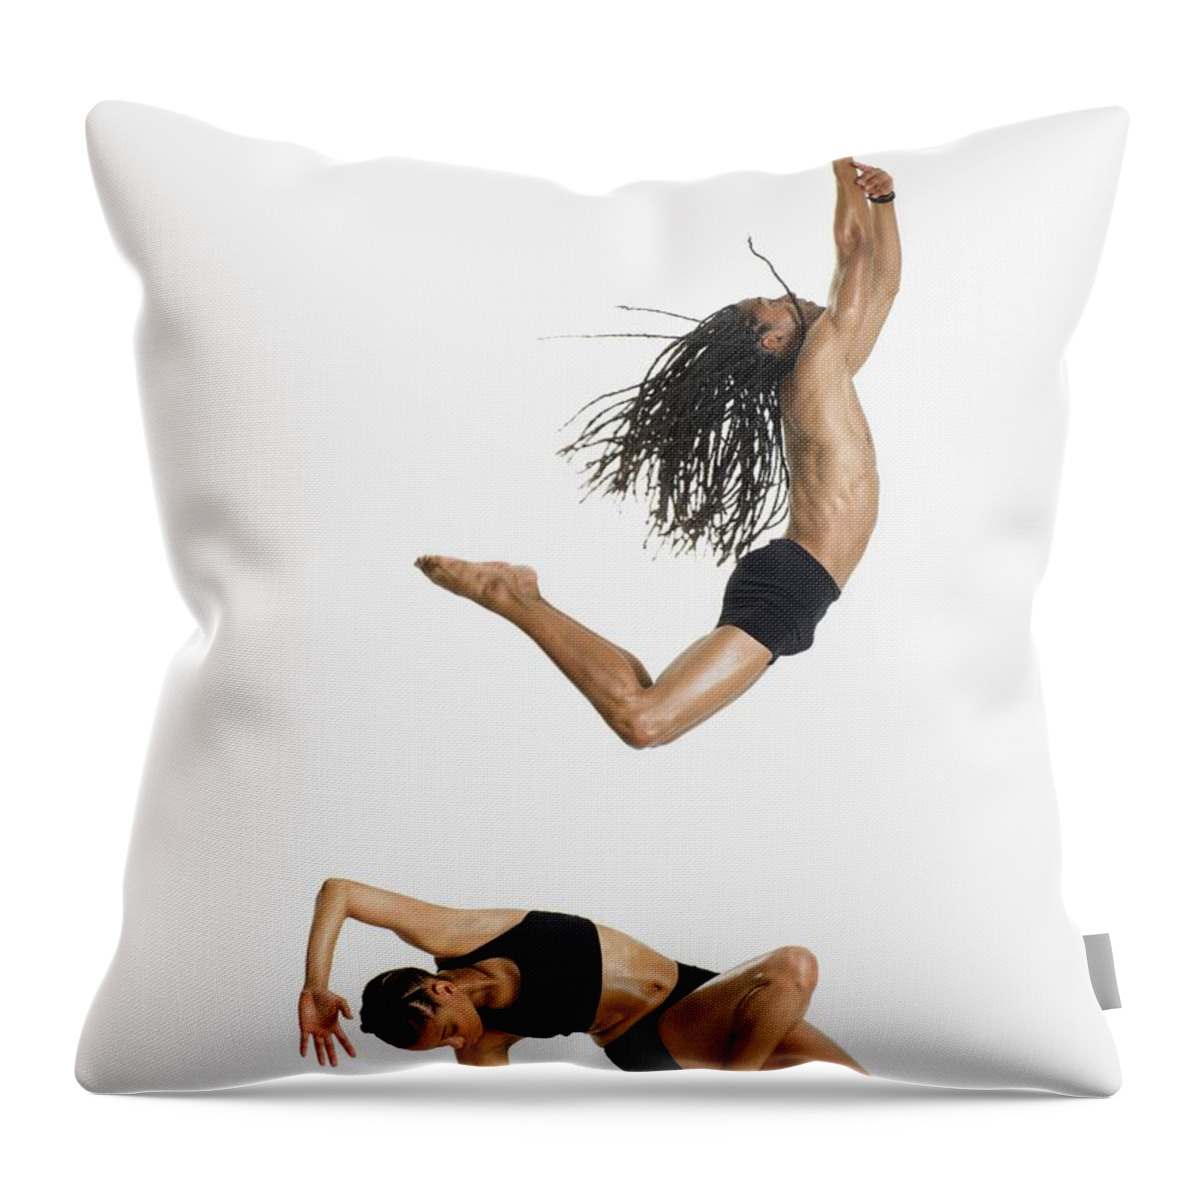 Young Men Throw Pillow featuring the photograph Two Dancers Performing by Image Source